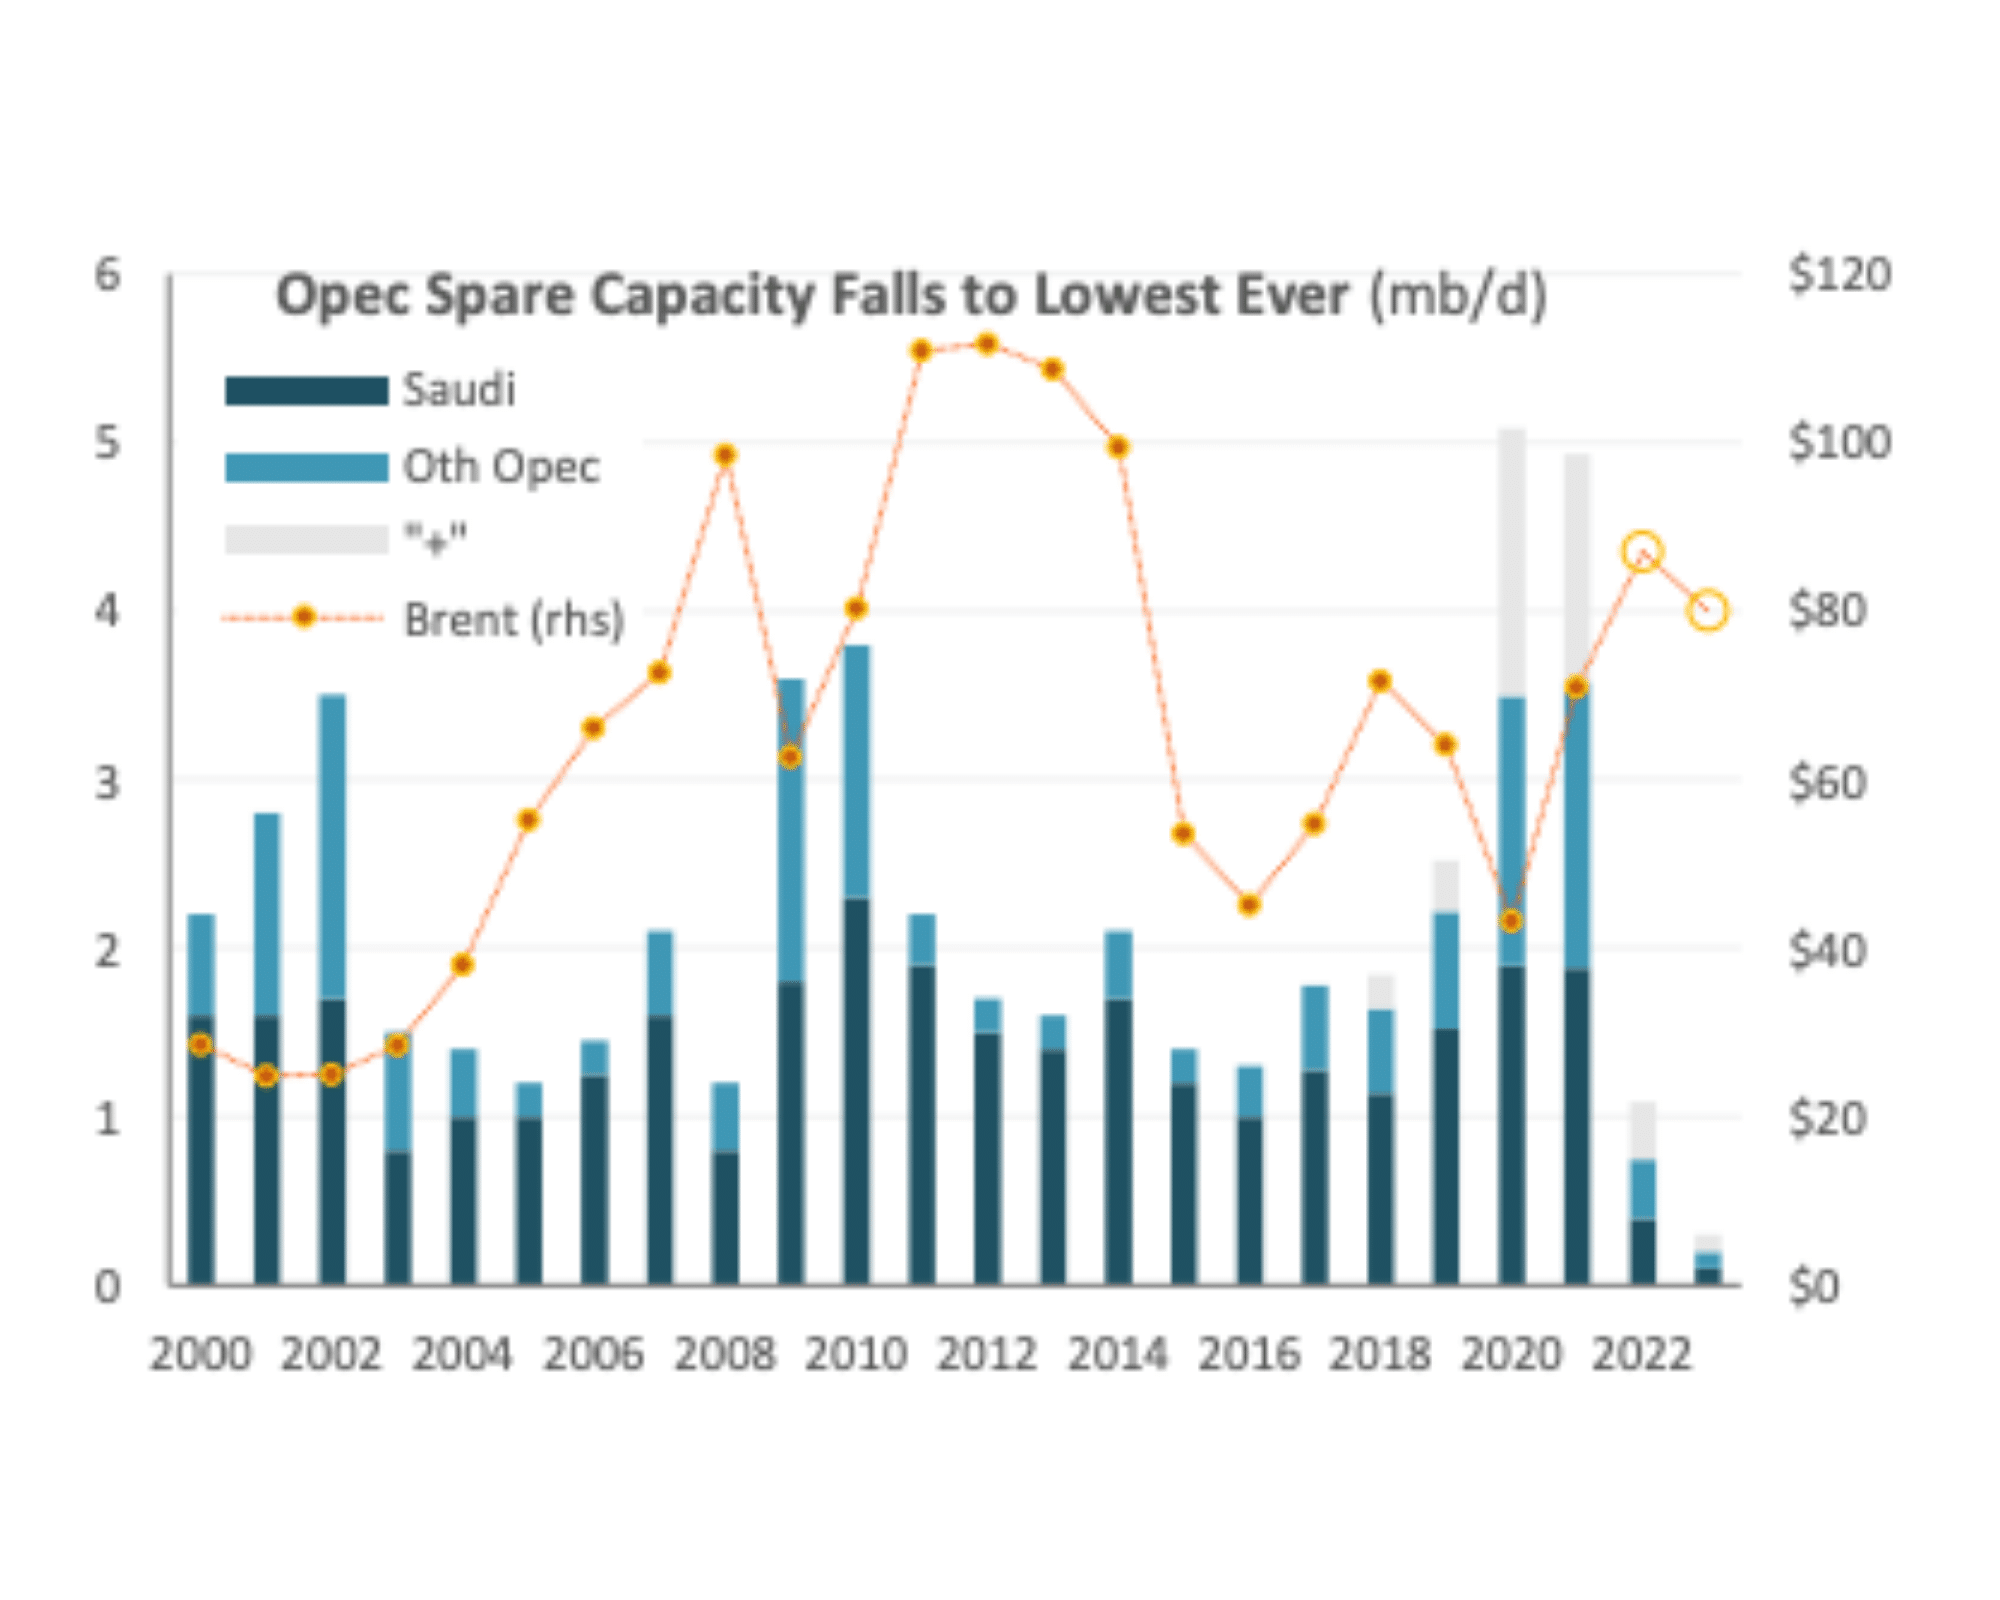 Chart showing OPEC capacity dropping to lowest levels since 2000